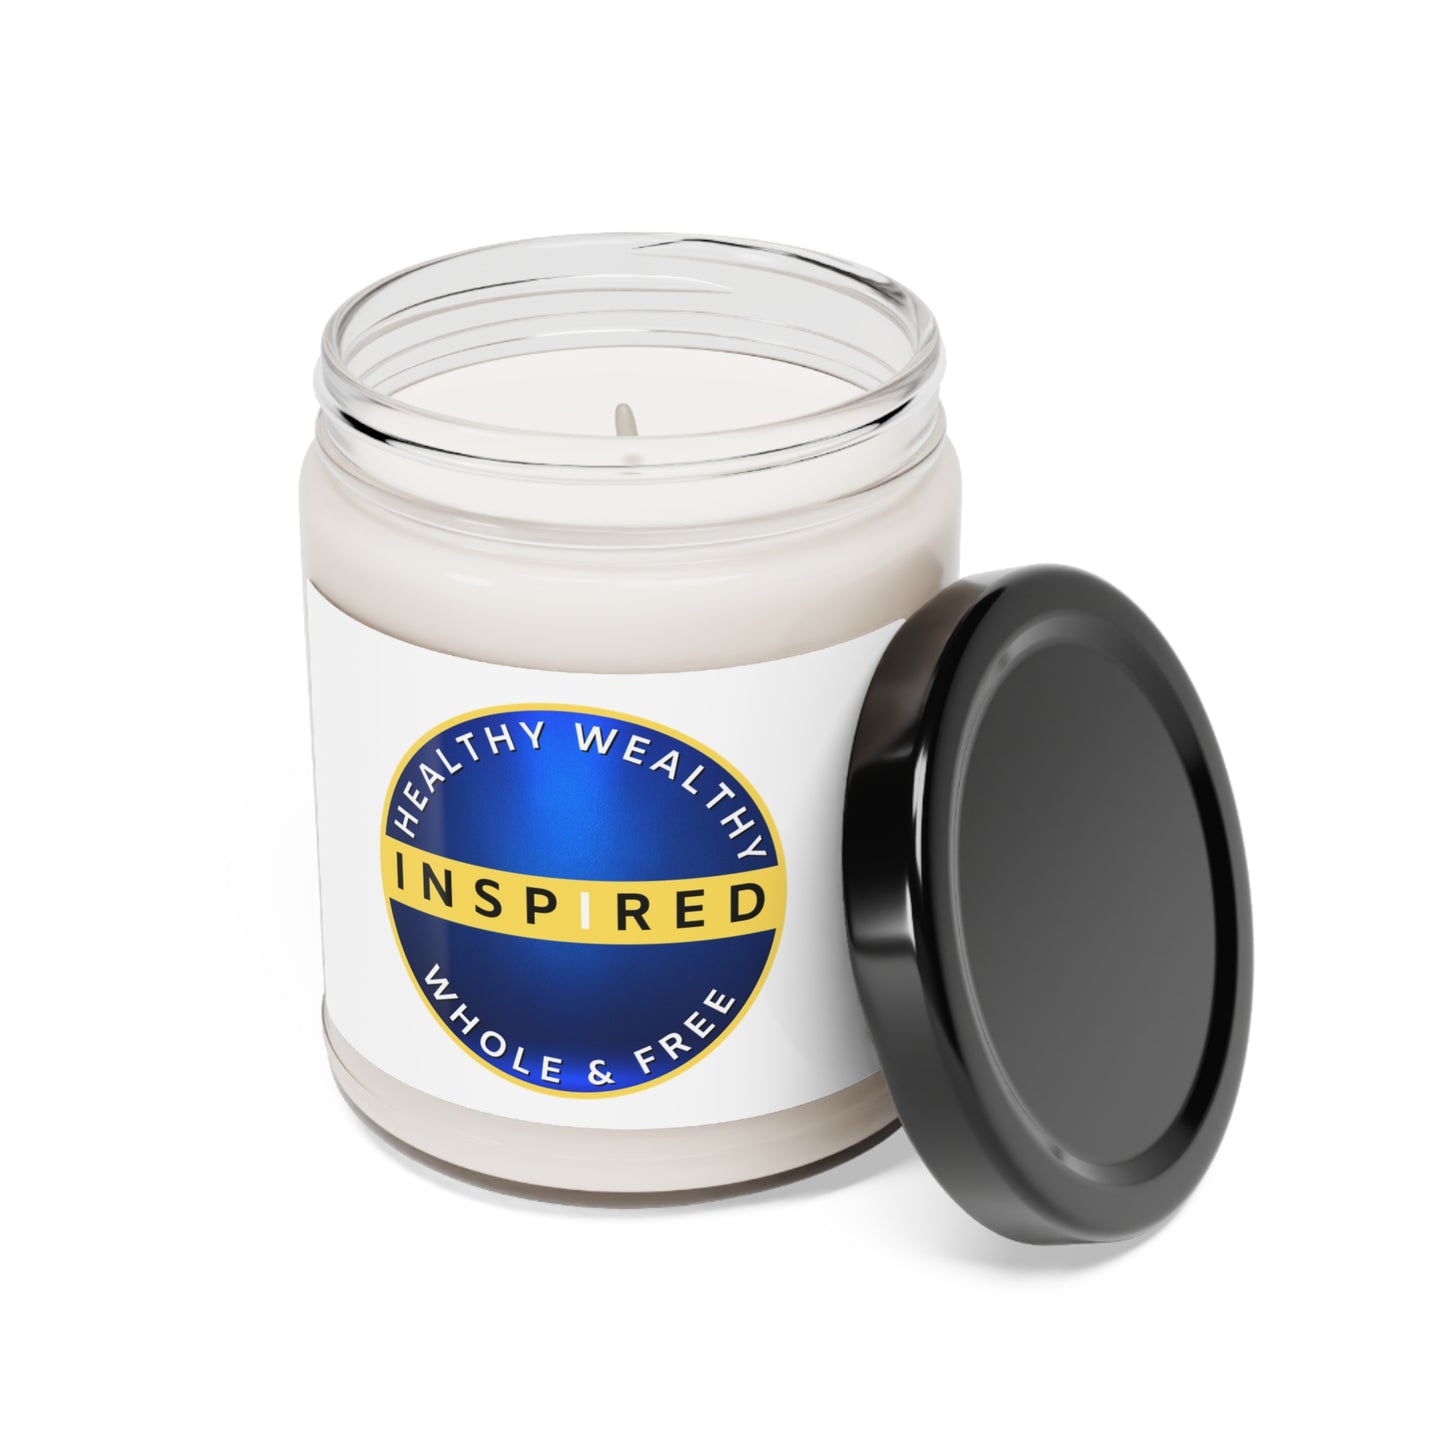 INSPIRED HWWF Scented Soy Candle, 9oz